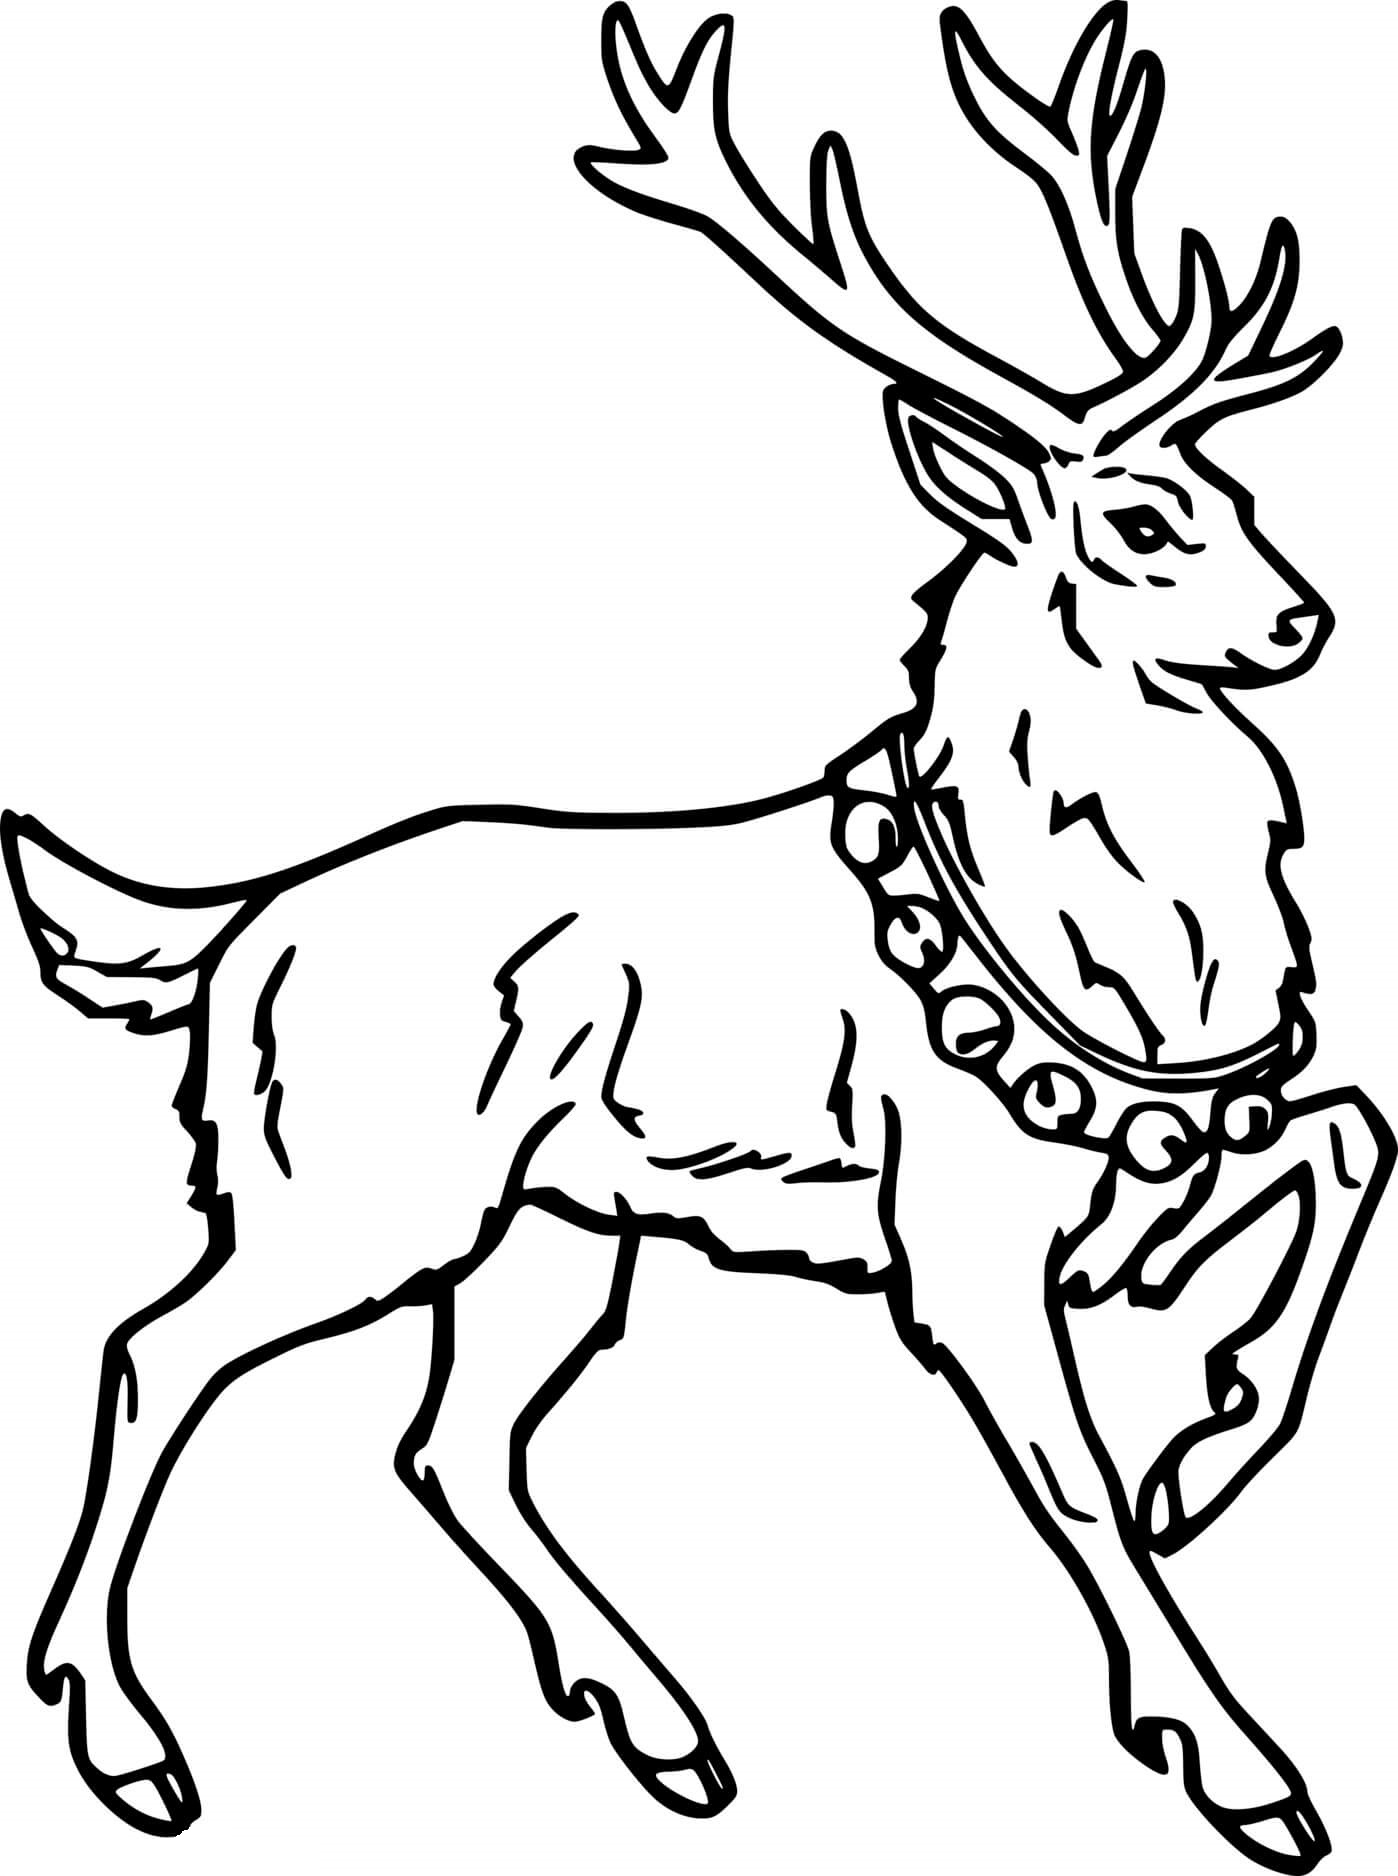 Realistic Deer With Bells Coloring Page